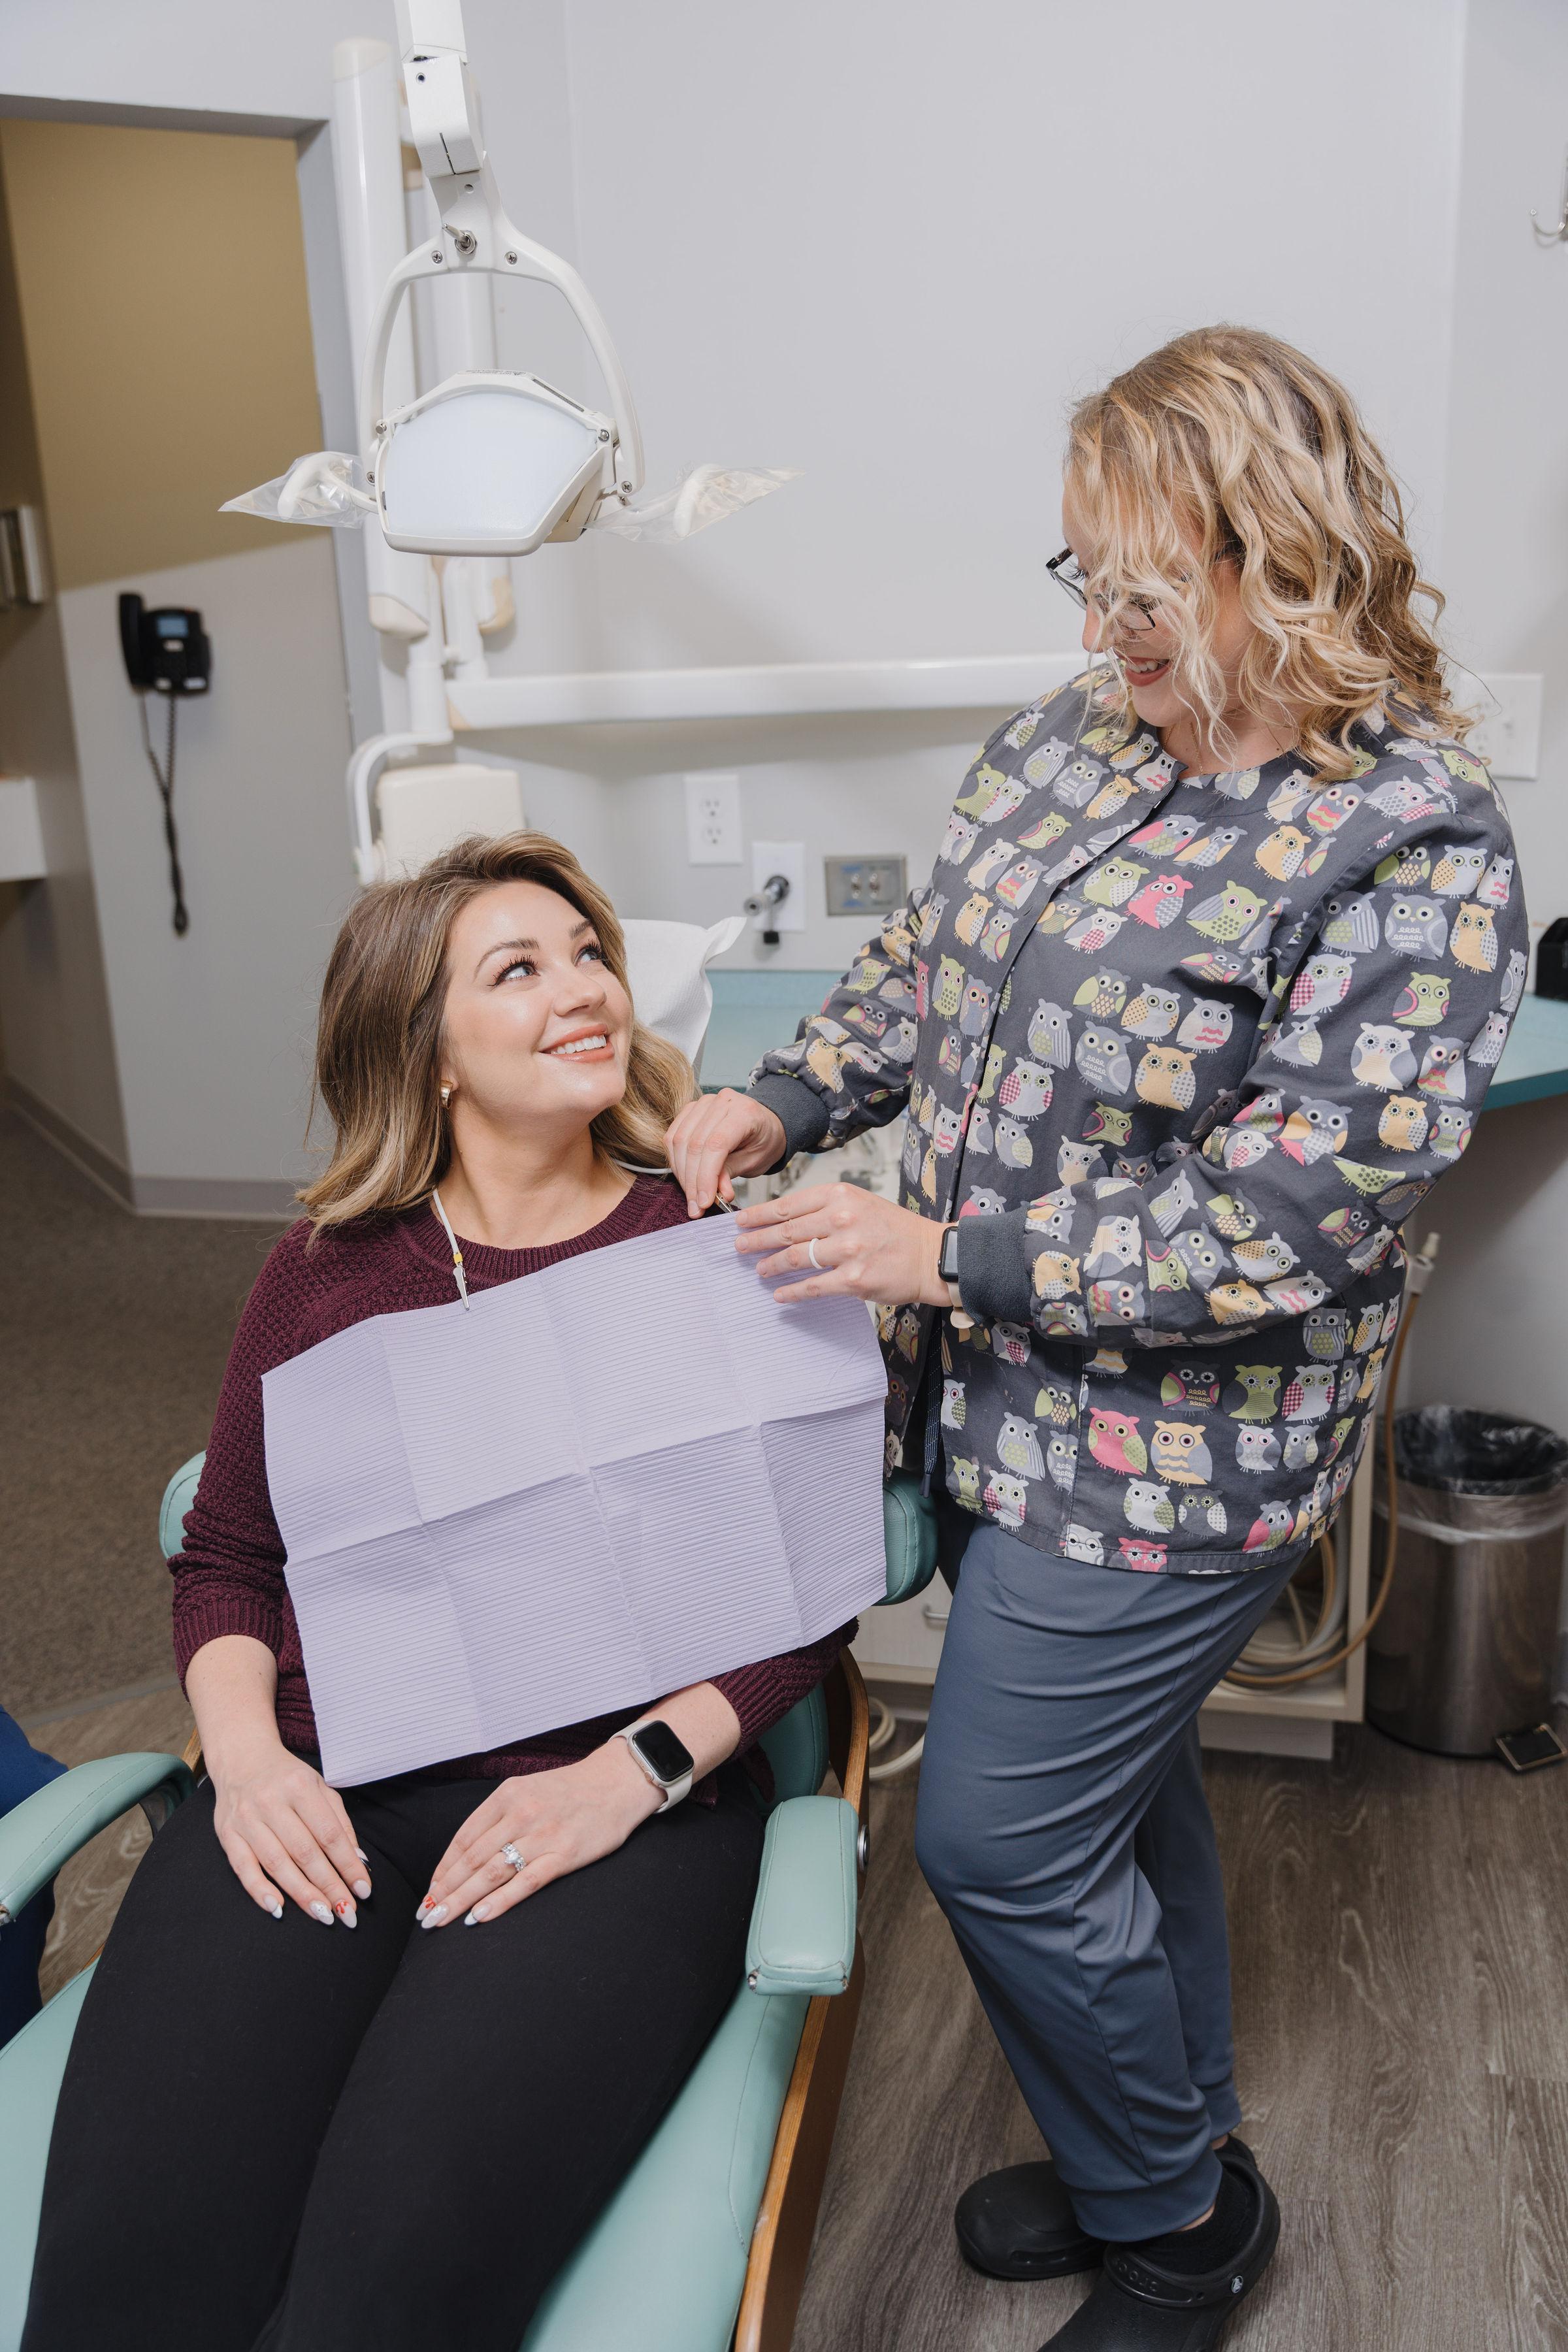 A dentist and dental assistant providing attentive and compassionate care to a dental patient.